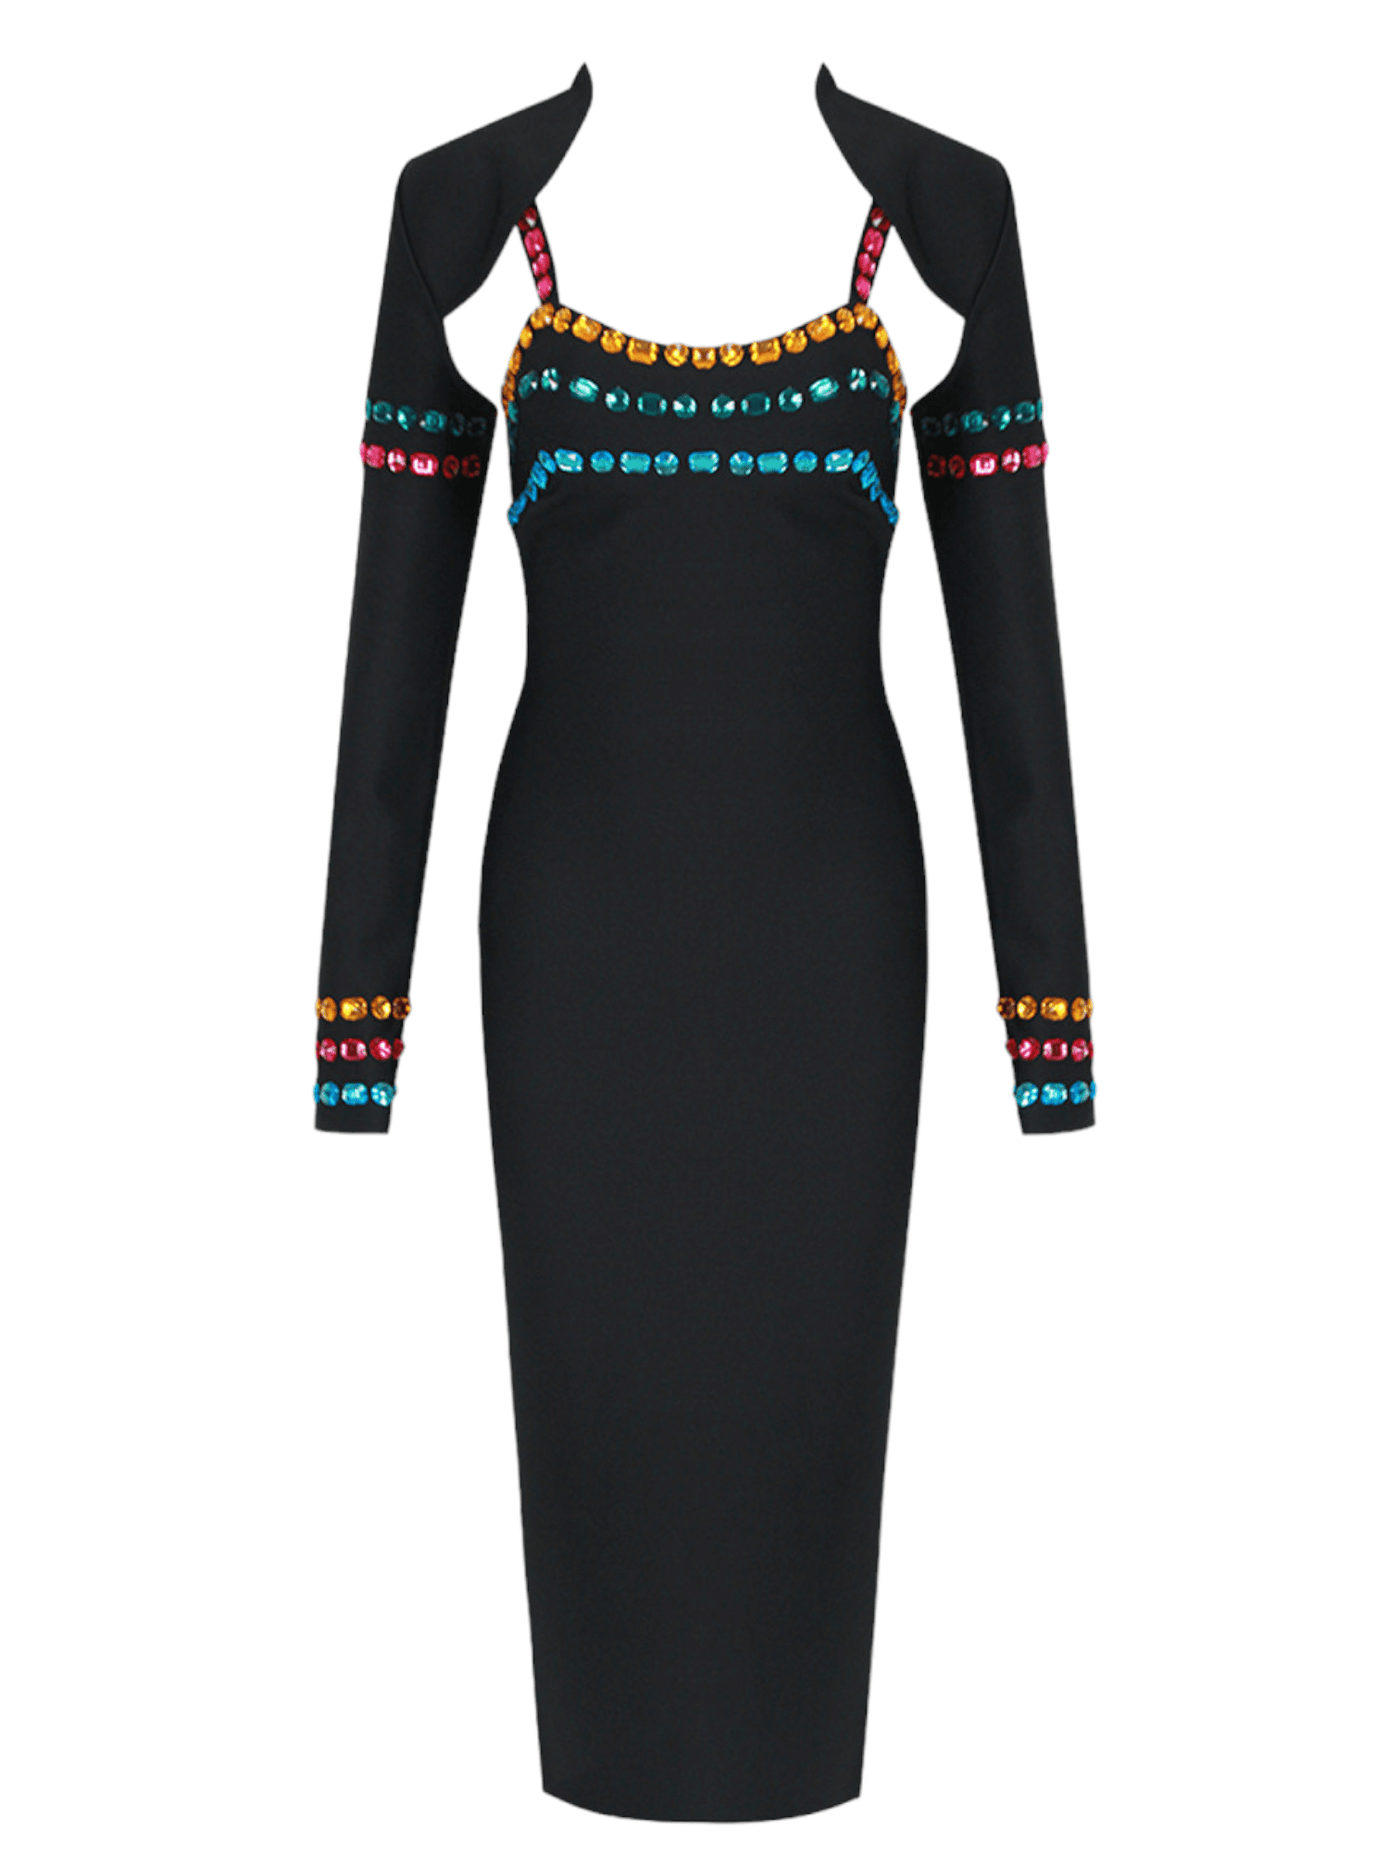 Black two-piece set featuring long-sleeve top and midi skirt adorned with shimmering crystals.